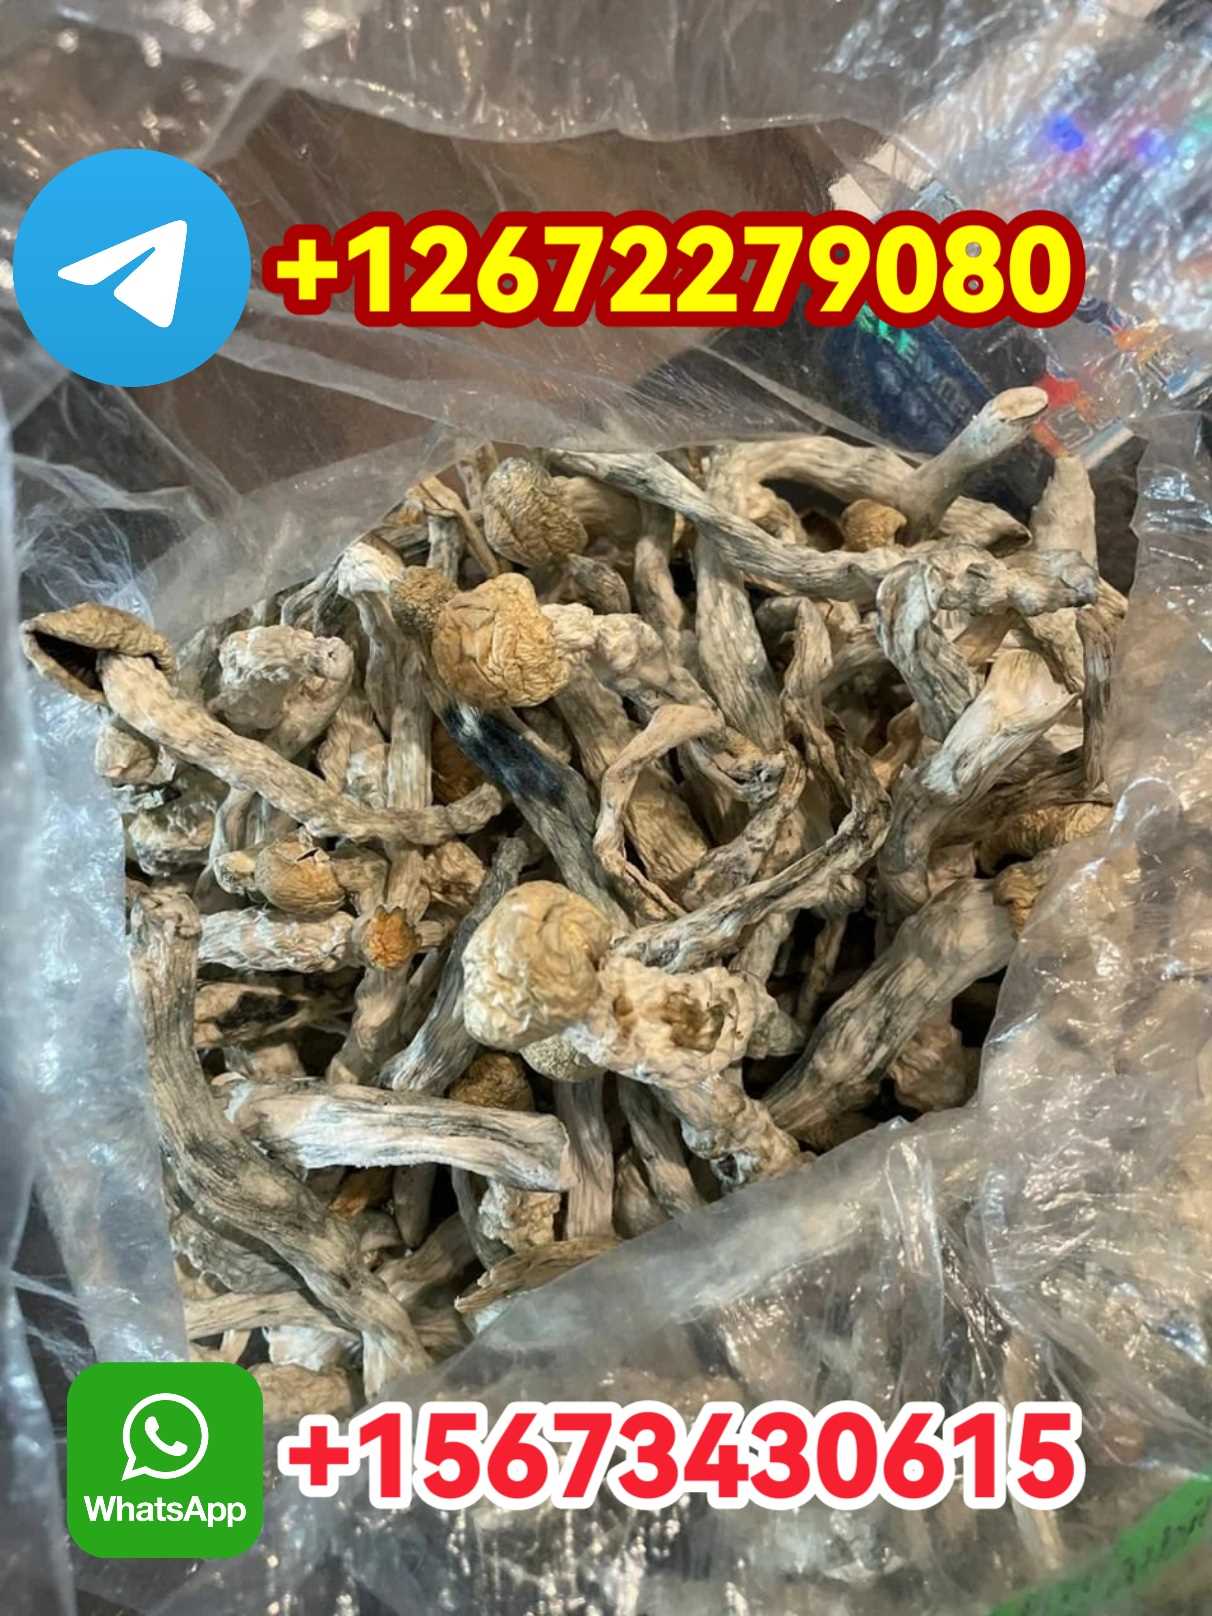 +12672279080 TO ORDE THC OIL, XANAX AND SHROOMS IN MILANO ITALY